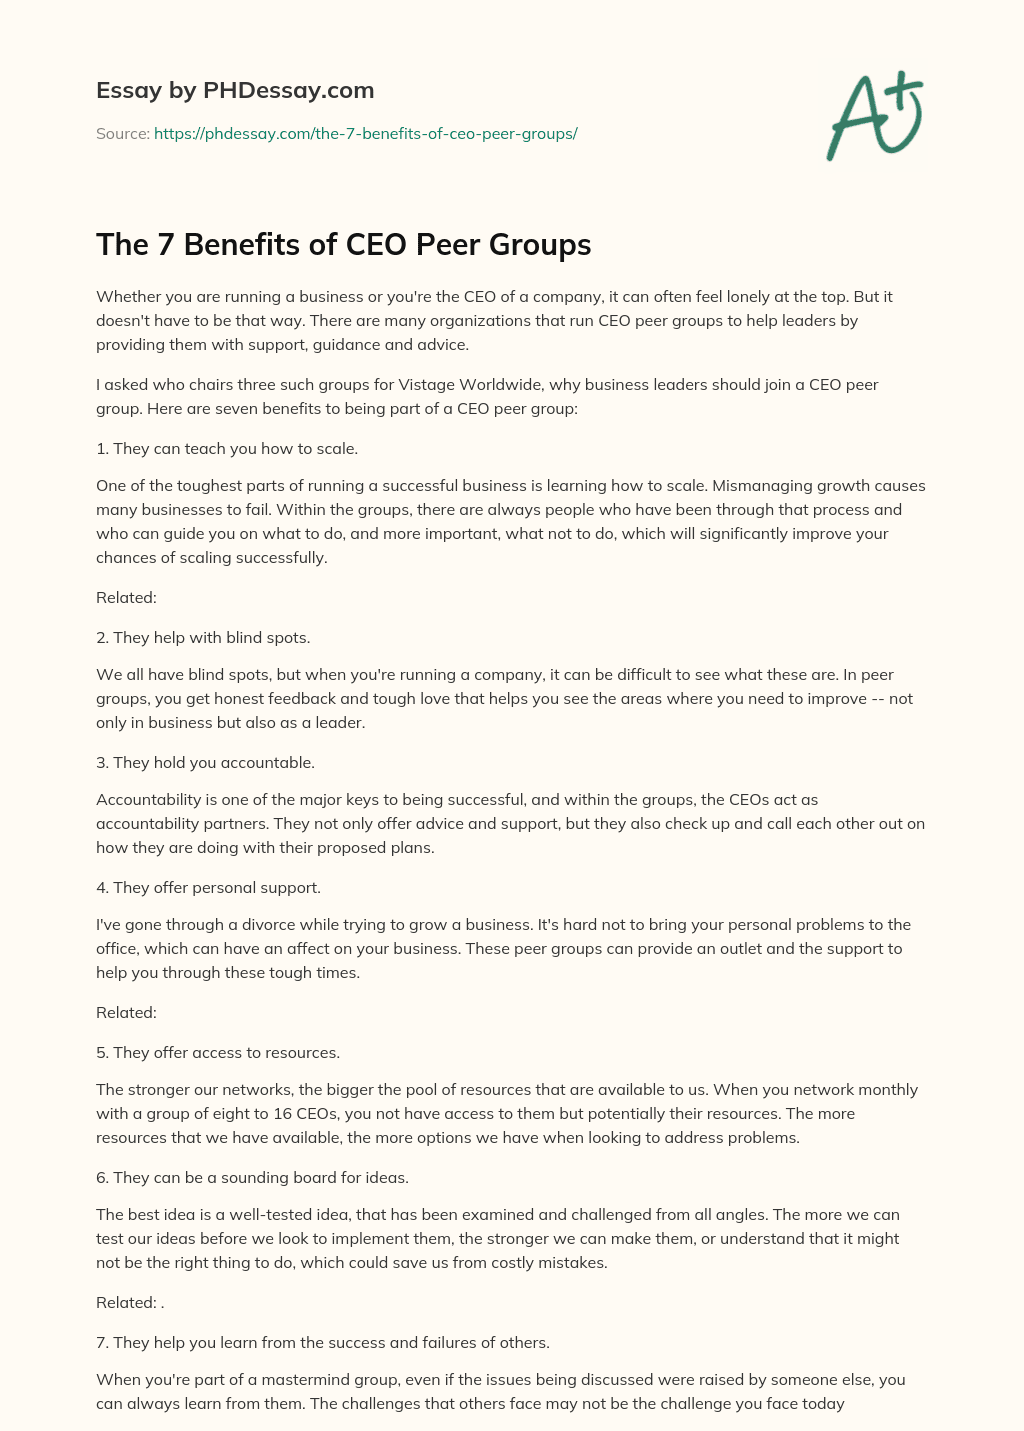 The 7 Benefits of CEO Peer Groups essay